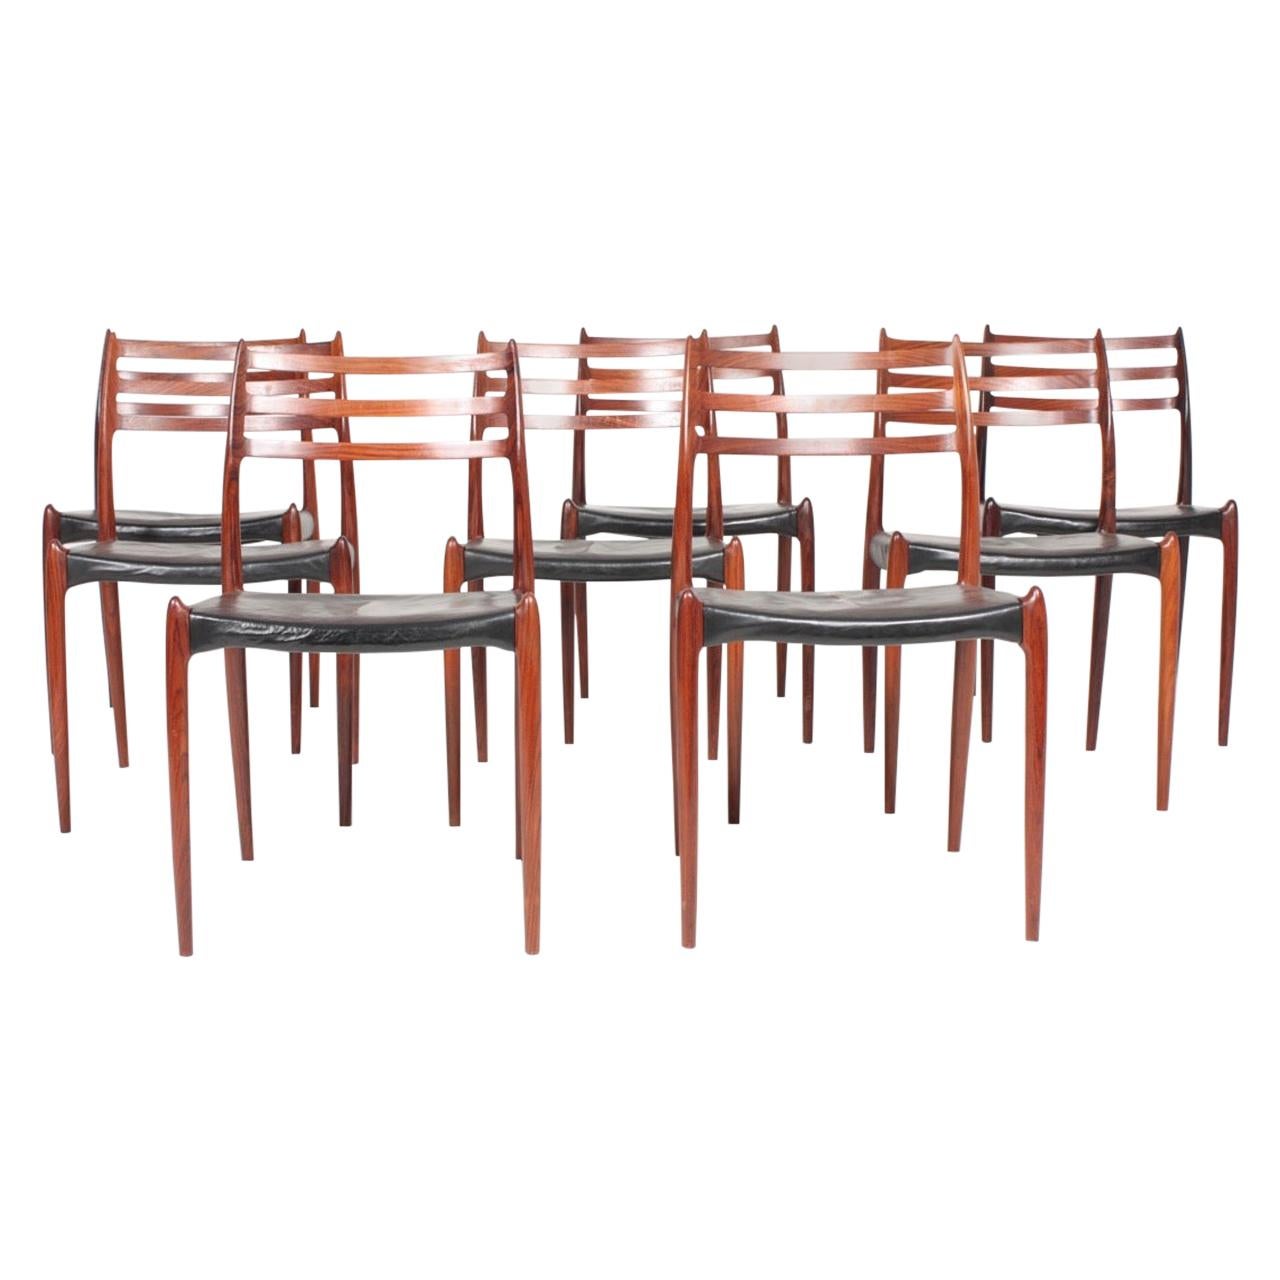 Set of Eight Midcentury Dining Chairs in Rosewood byMøller, Danish Design, 1960s